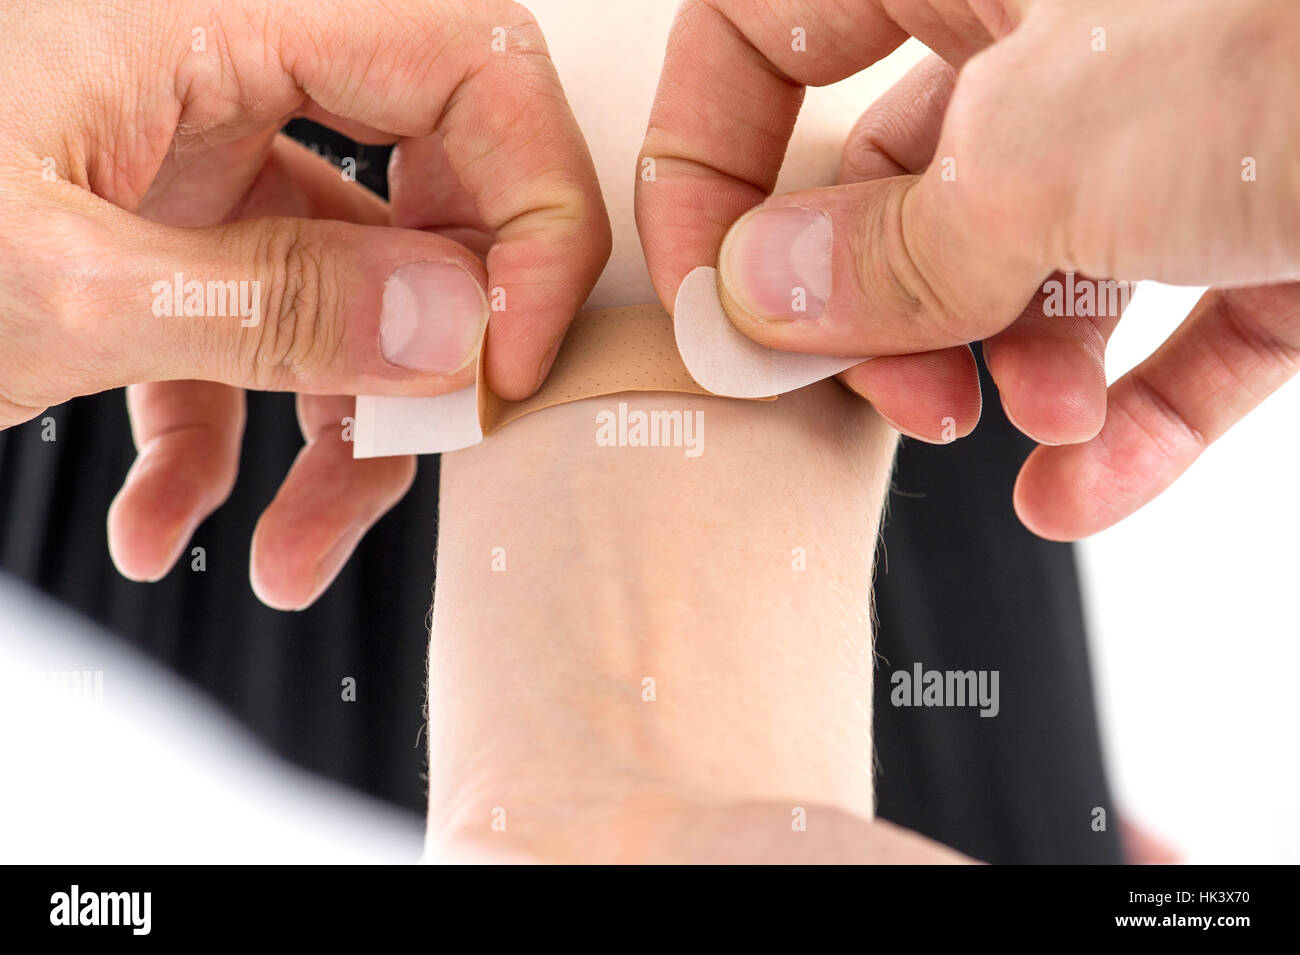 gesture, hand, provision, health, human, human being, person, plaster, bandage, Stock Photo